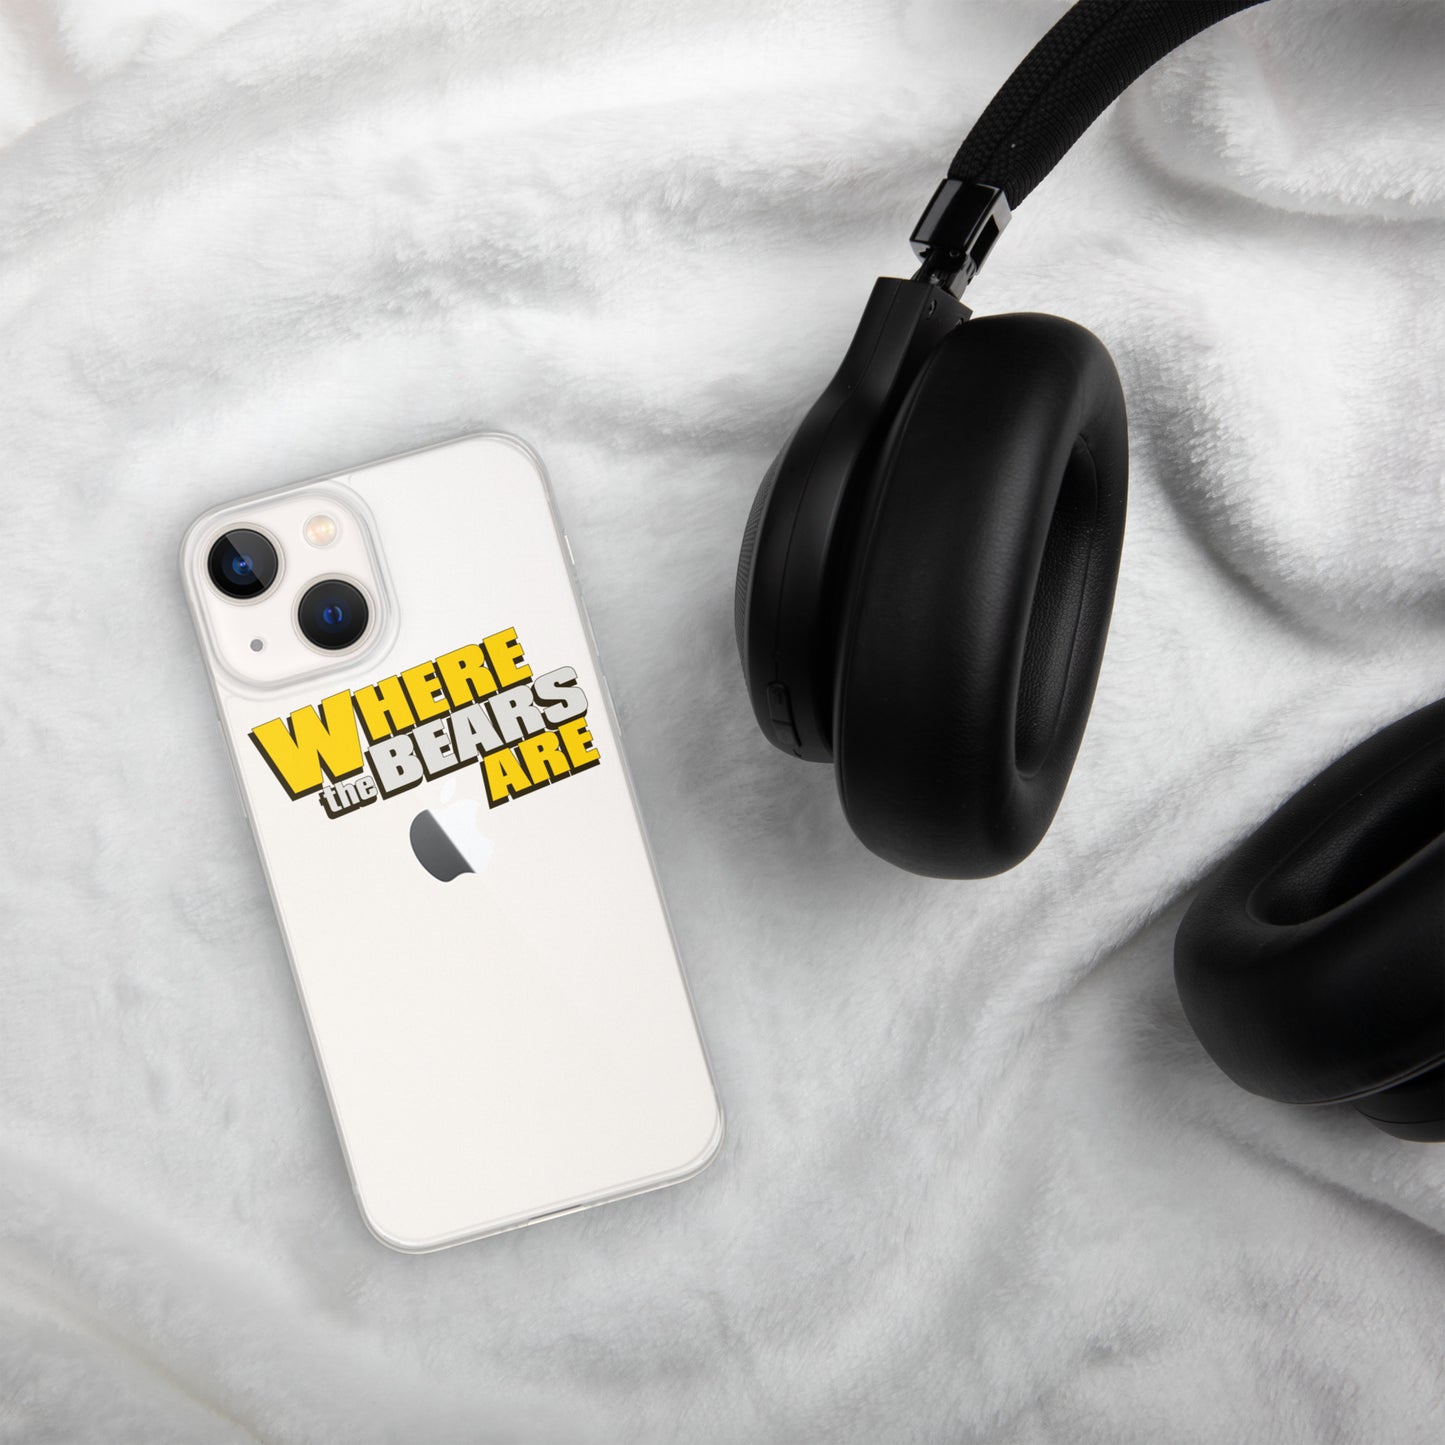 'Where The Bears Are' Logo iPhone Case